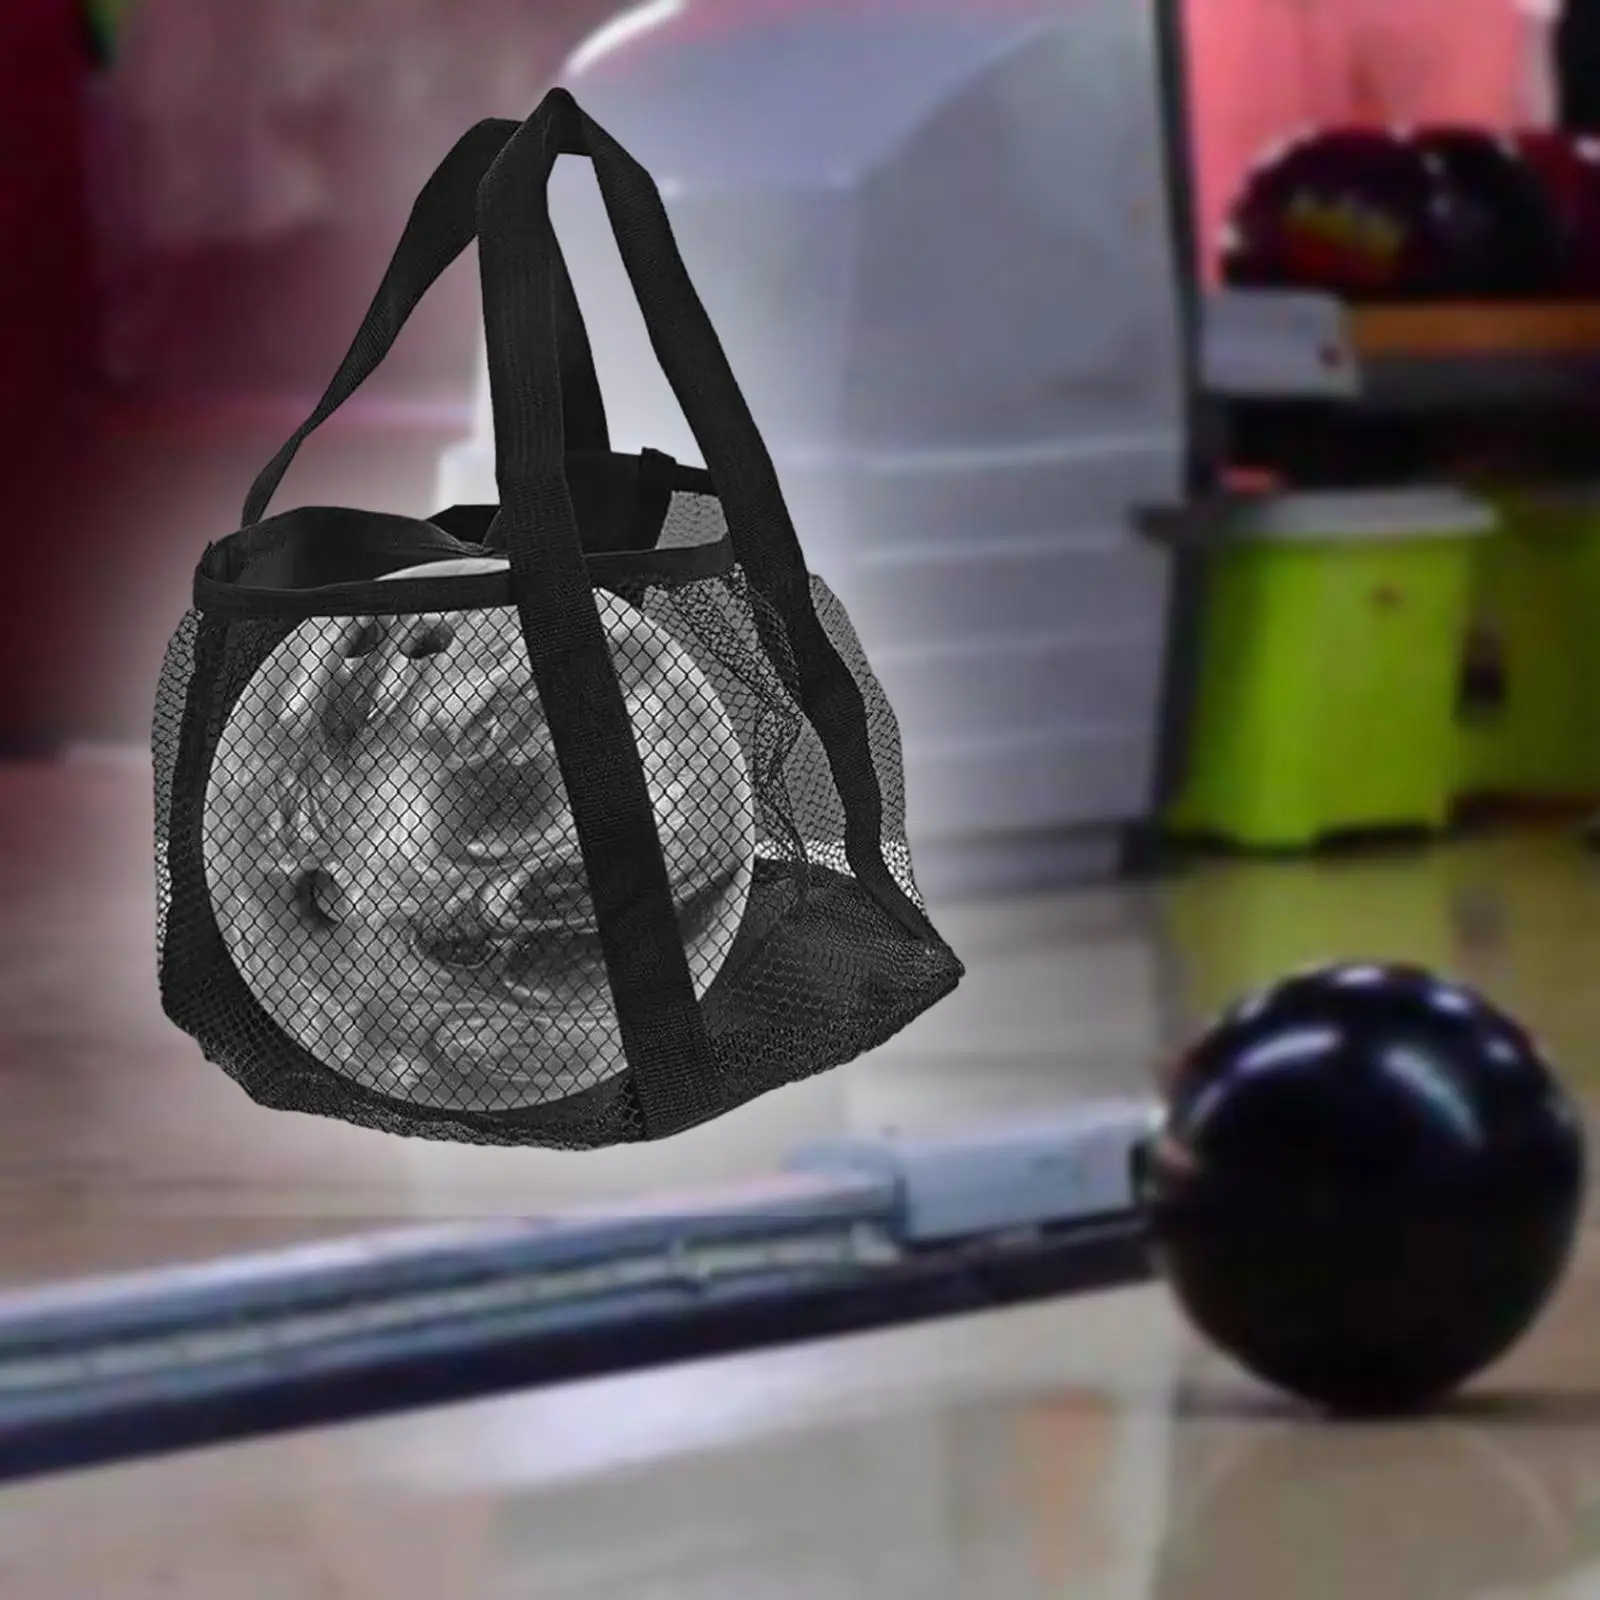 Bowling Bag for Single Ball, Lightweight Oxford Fabric Bowling Tote Handbag with Handle Carrying Bag for Gym Bowling Accessories